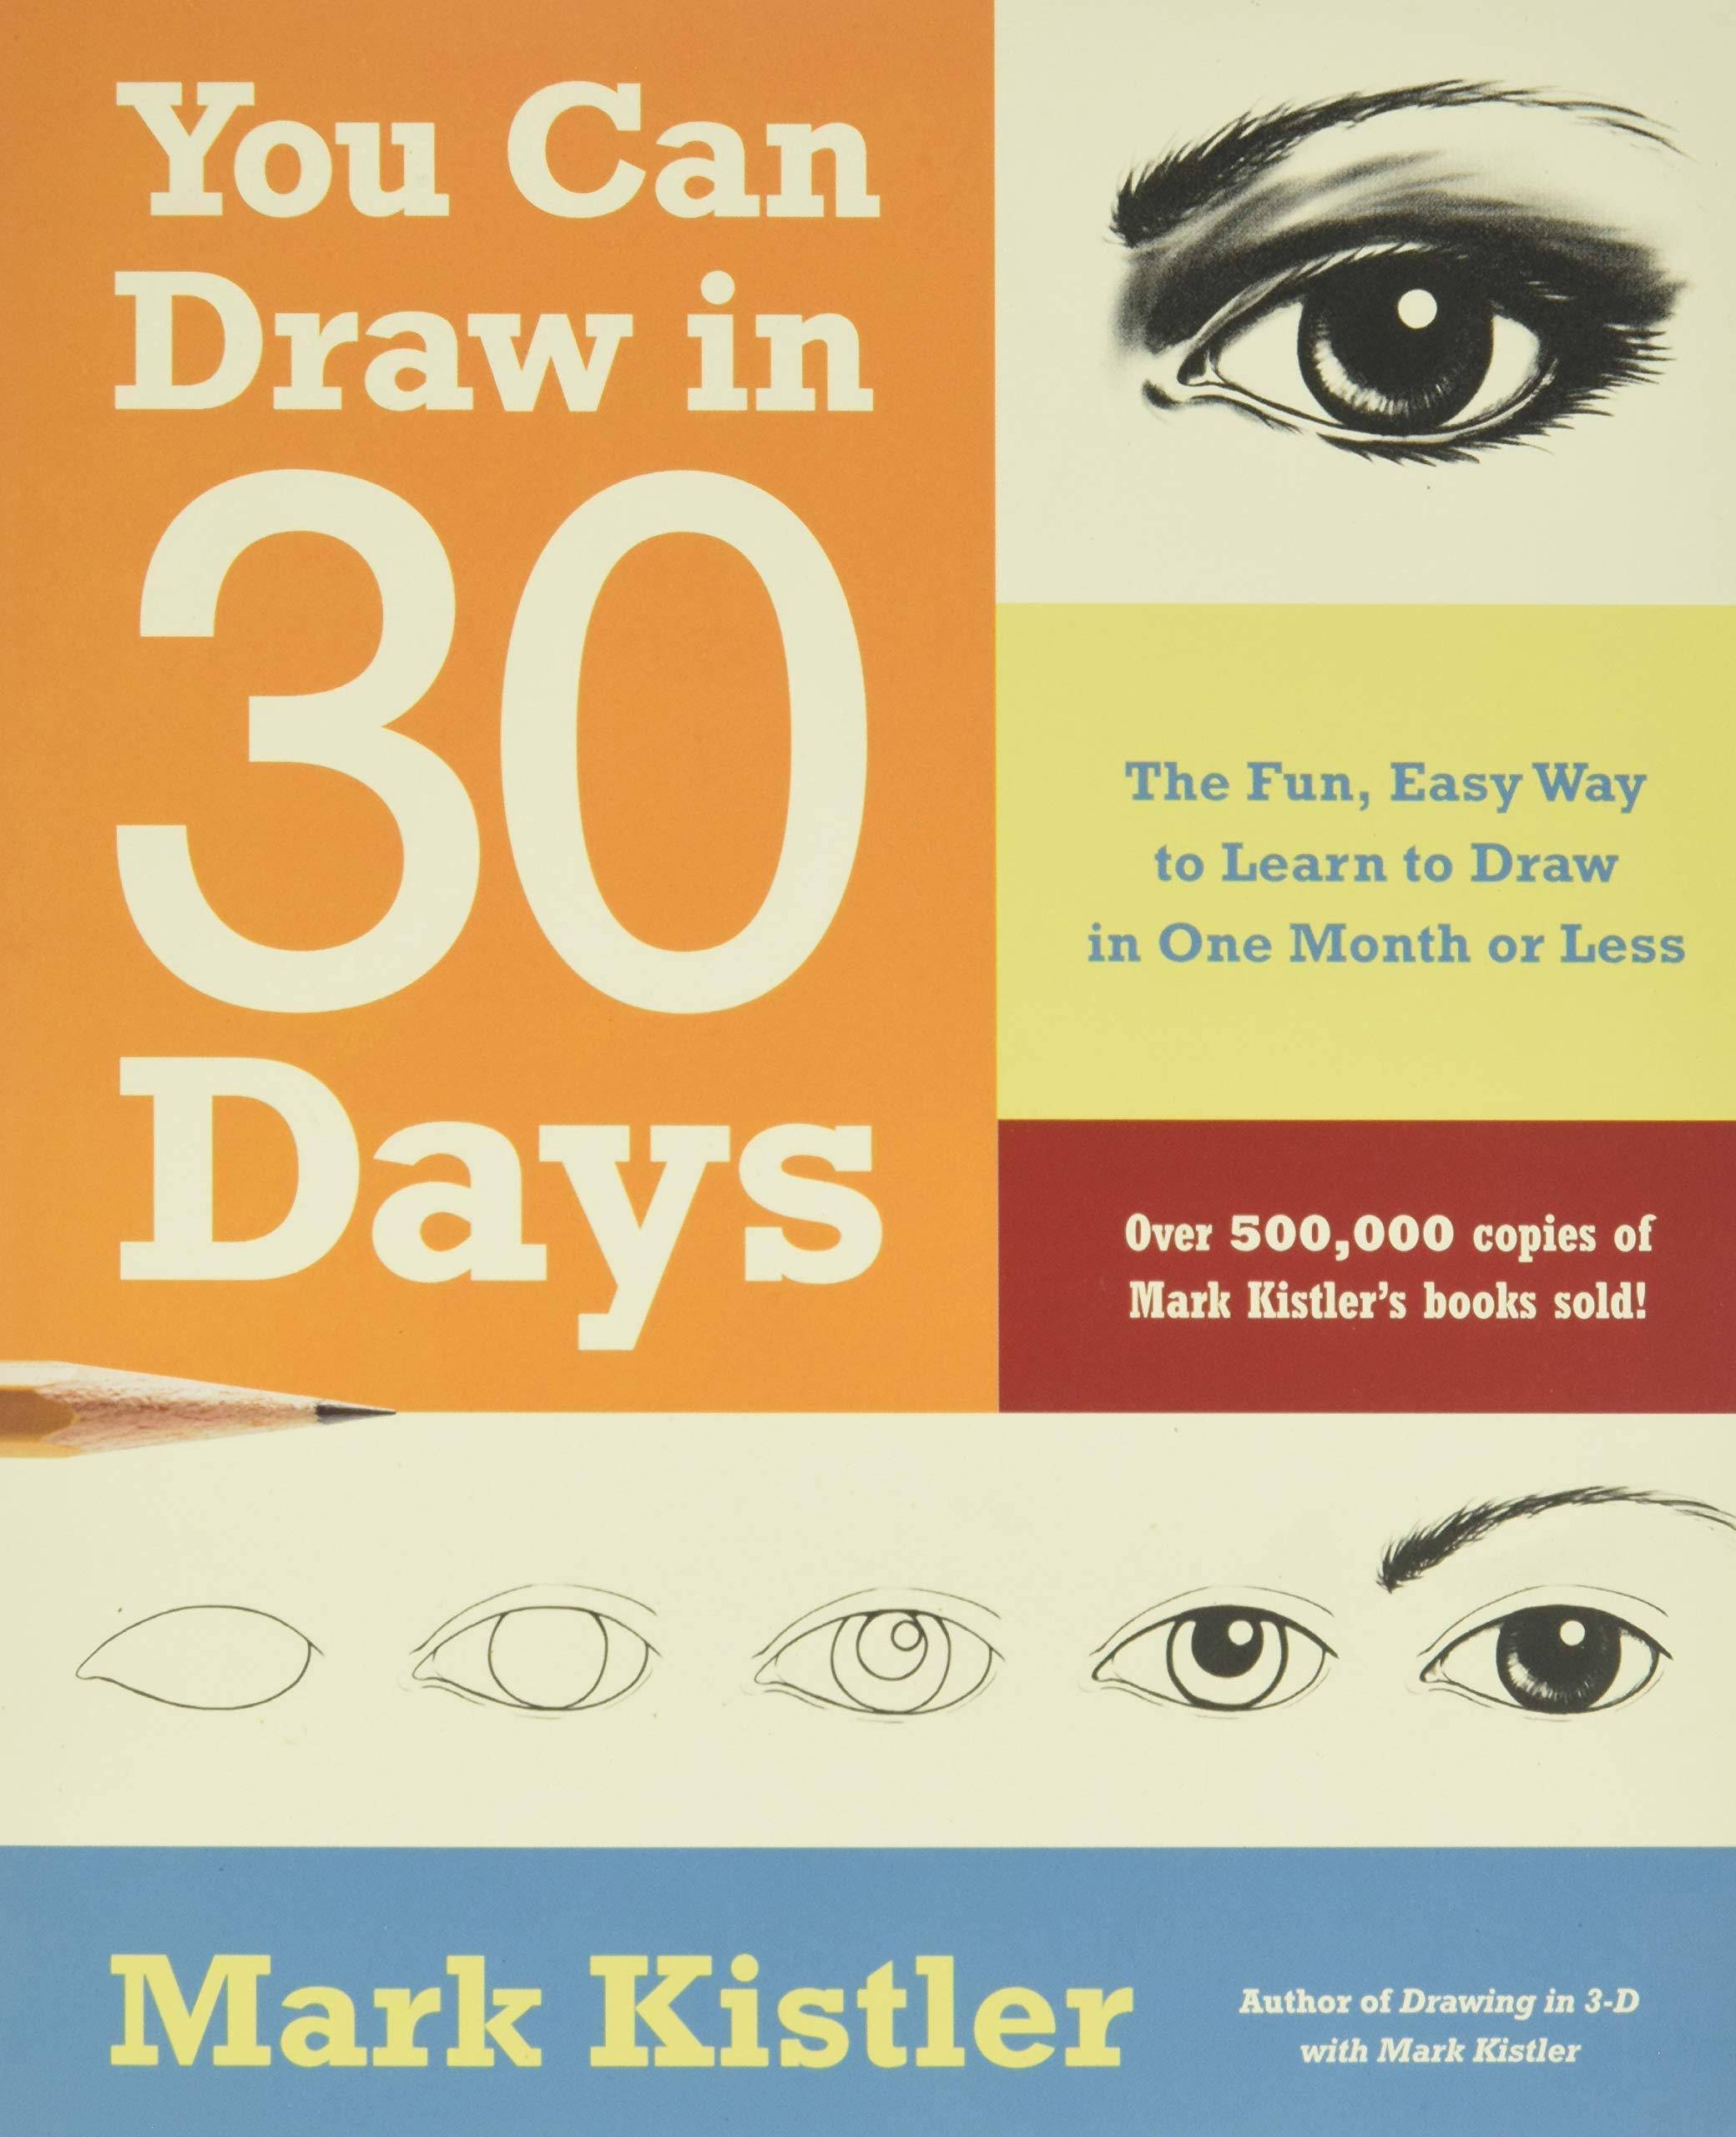 You Can Draw in 30 Days: The Fun, Easy Way to Learn to Draw in O - SureShot Books Publishing LLC